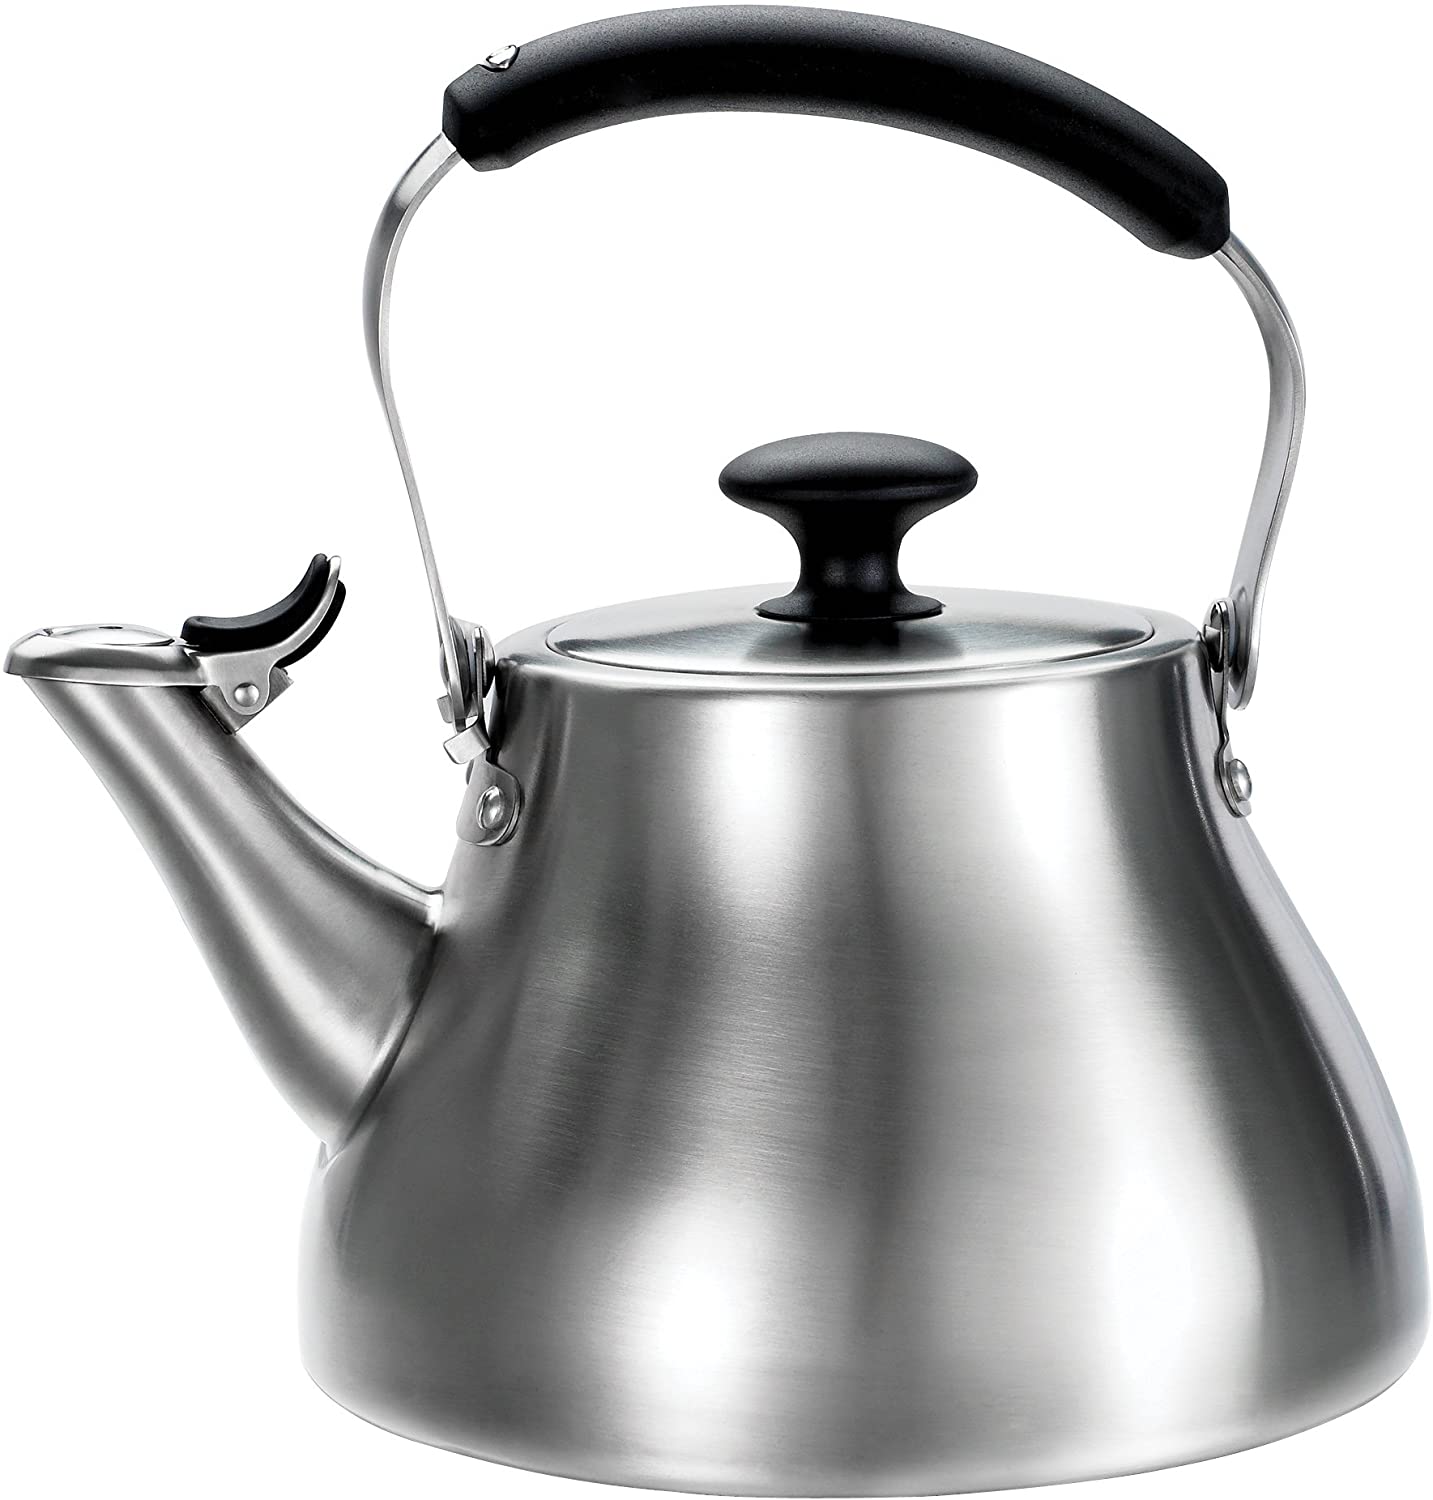 brushed stainless steel Oxo Tea Kettle